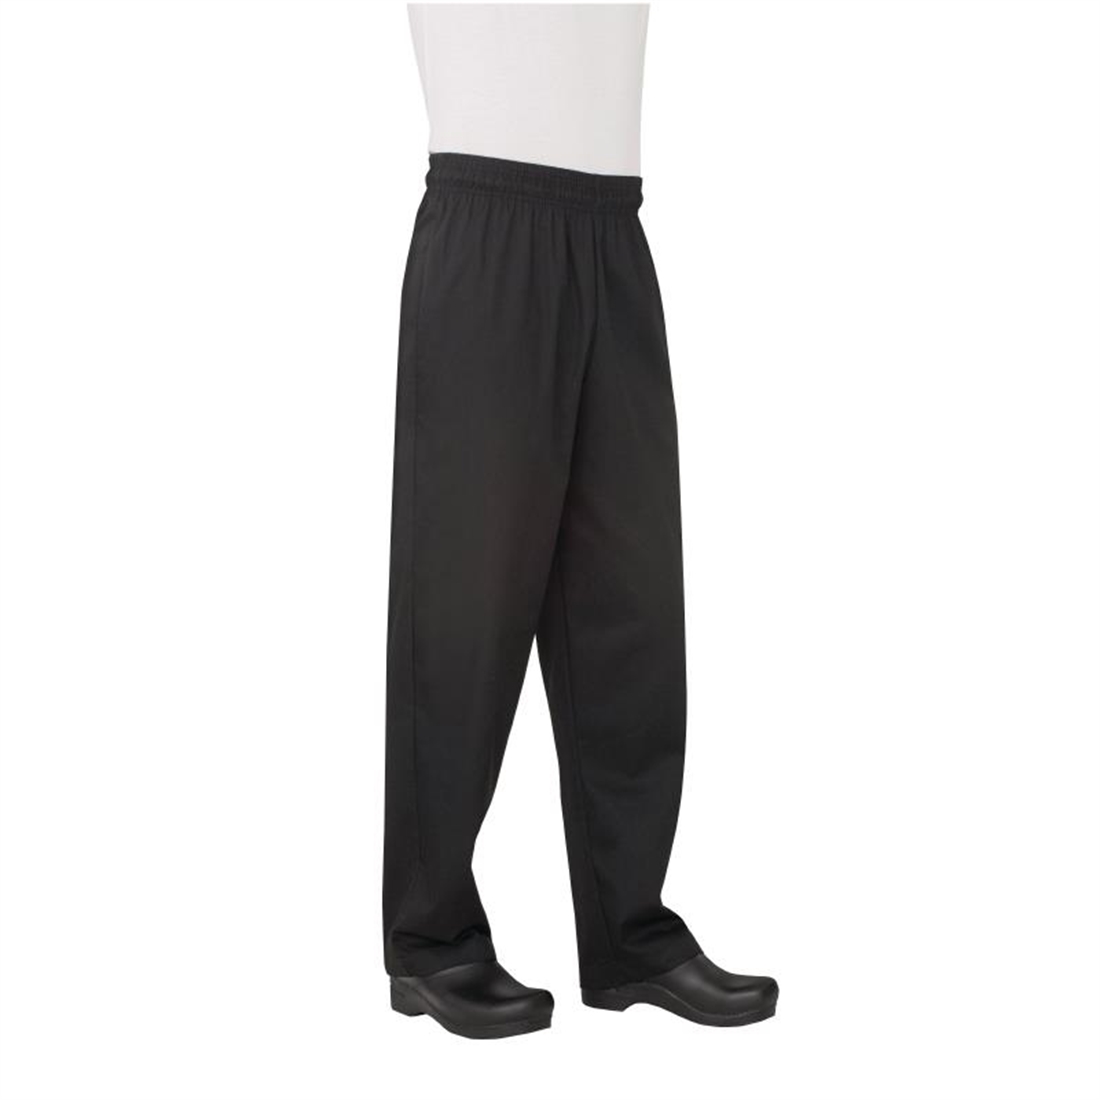 Chef Works Unisex Basic Baggy Chefs Trousers Black S